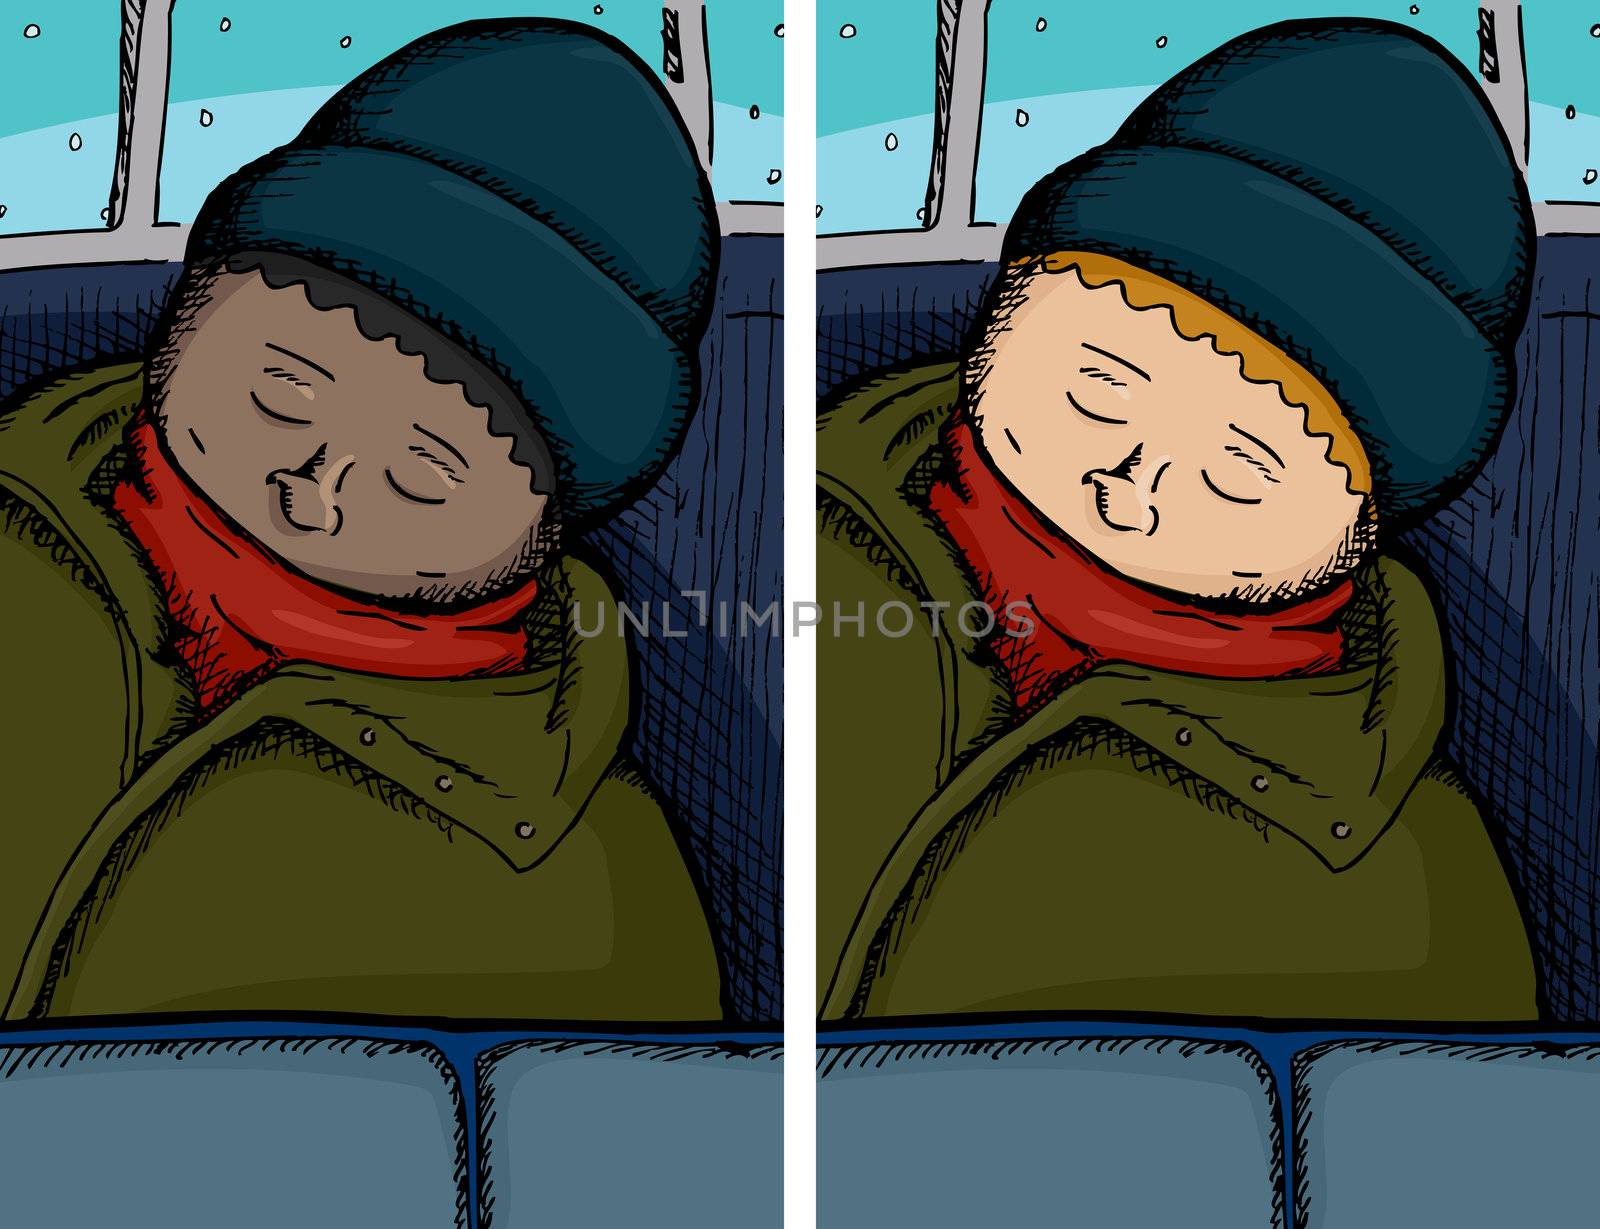 Person asleep on bus in dark and light skinned versions